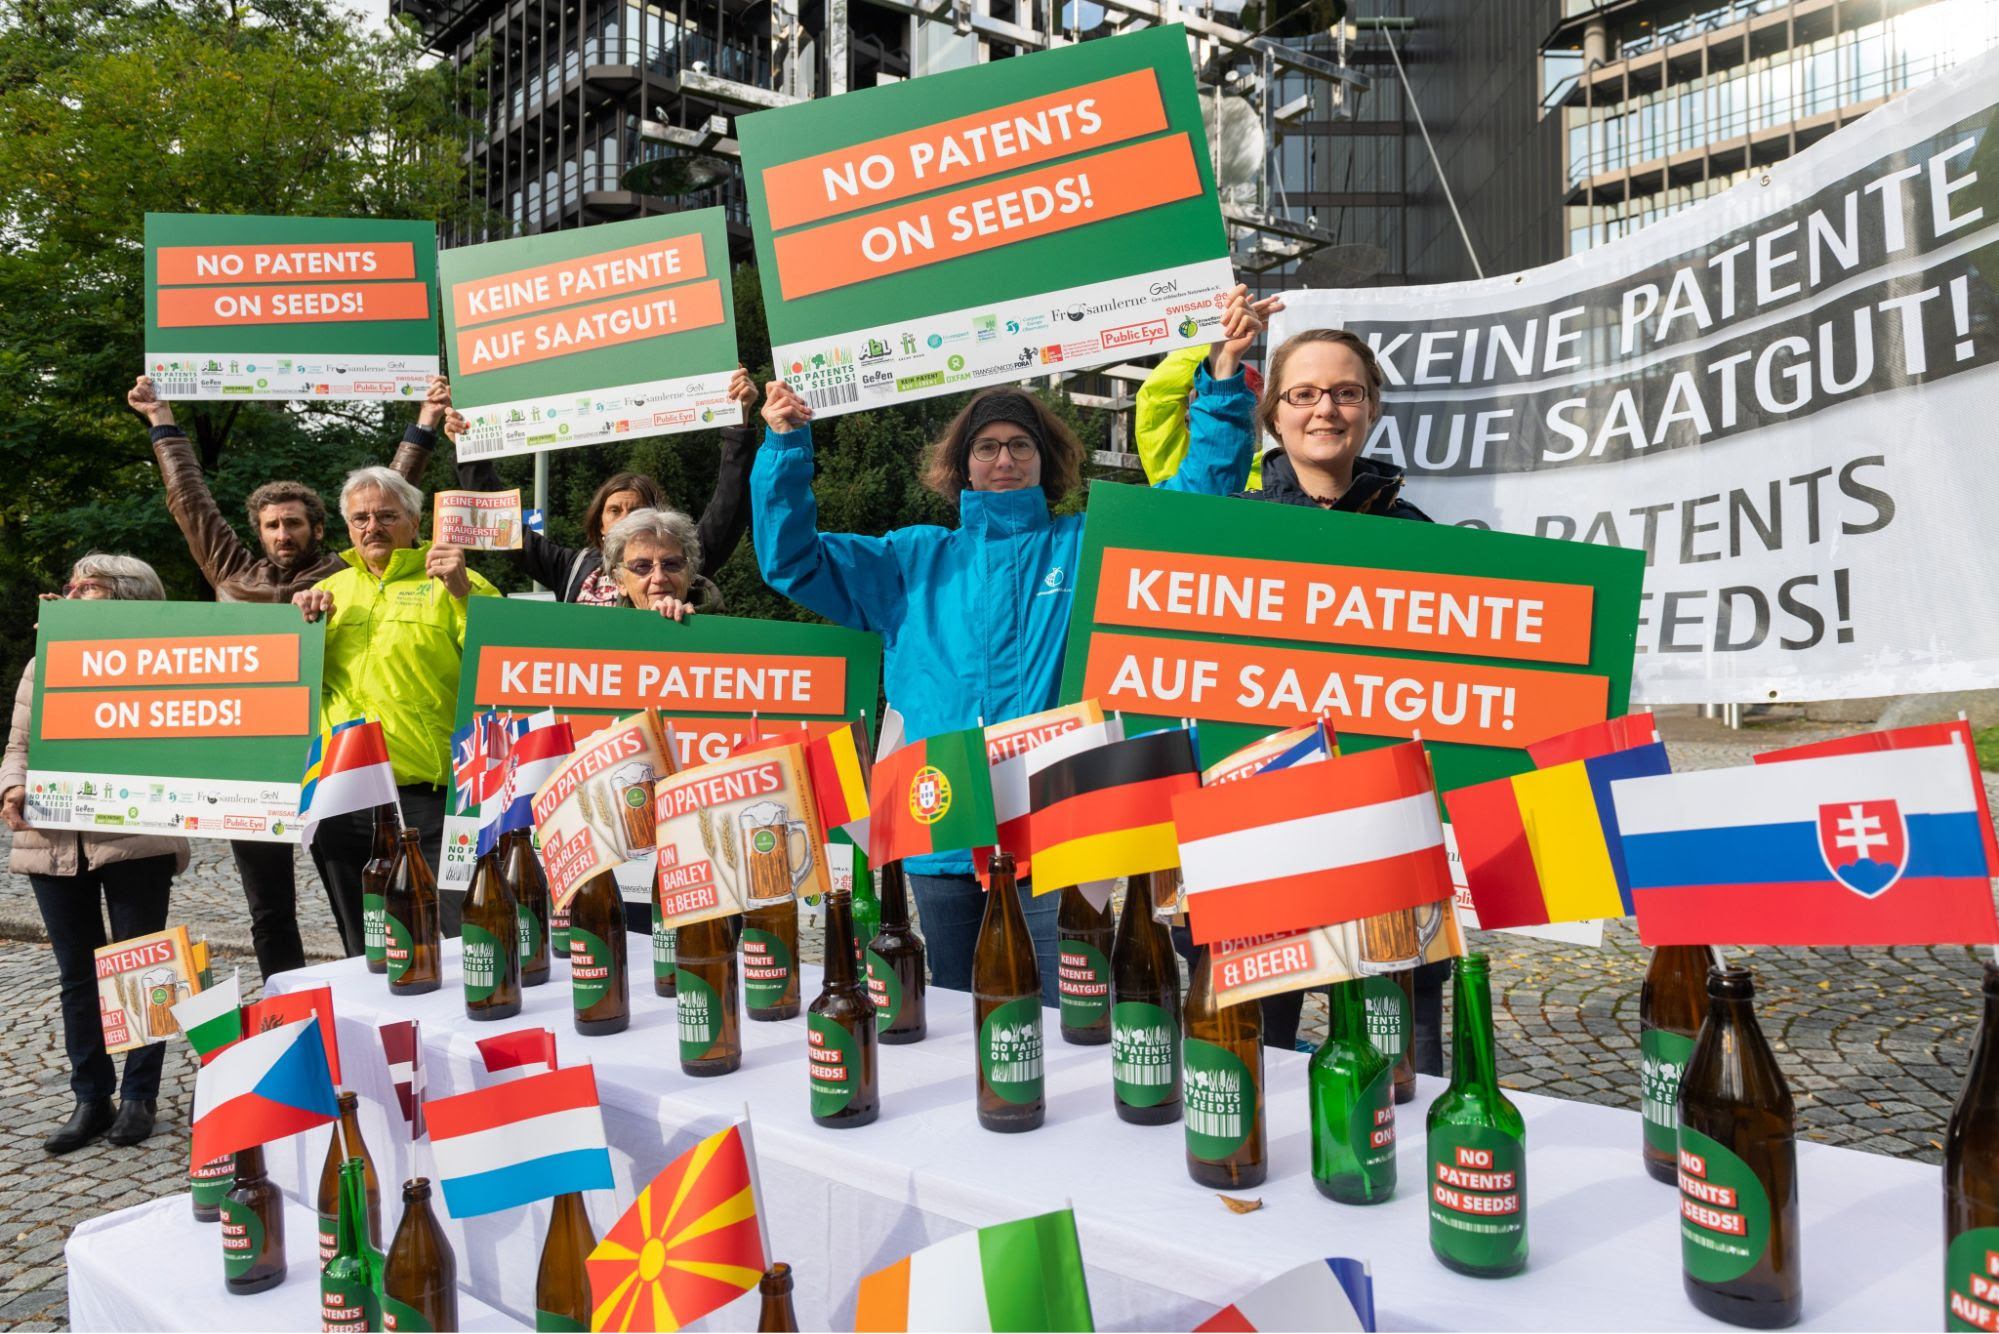 Front of picture, table covered in beer bottles with European flags in them. Behind table to left, group of 6 people holding placards.